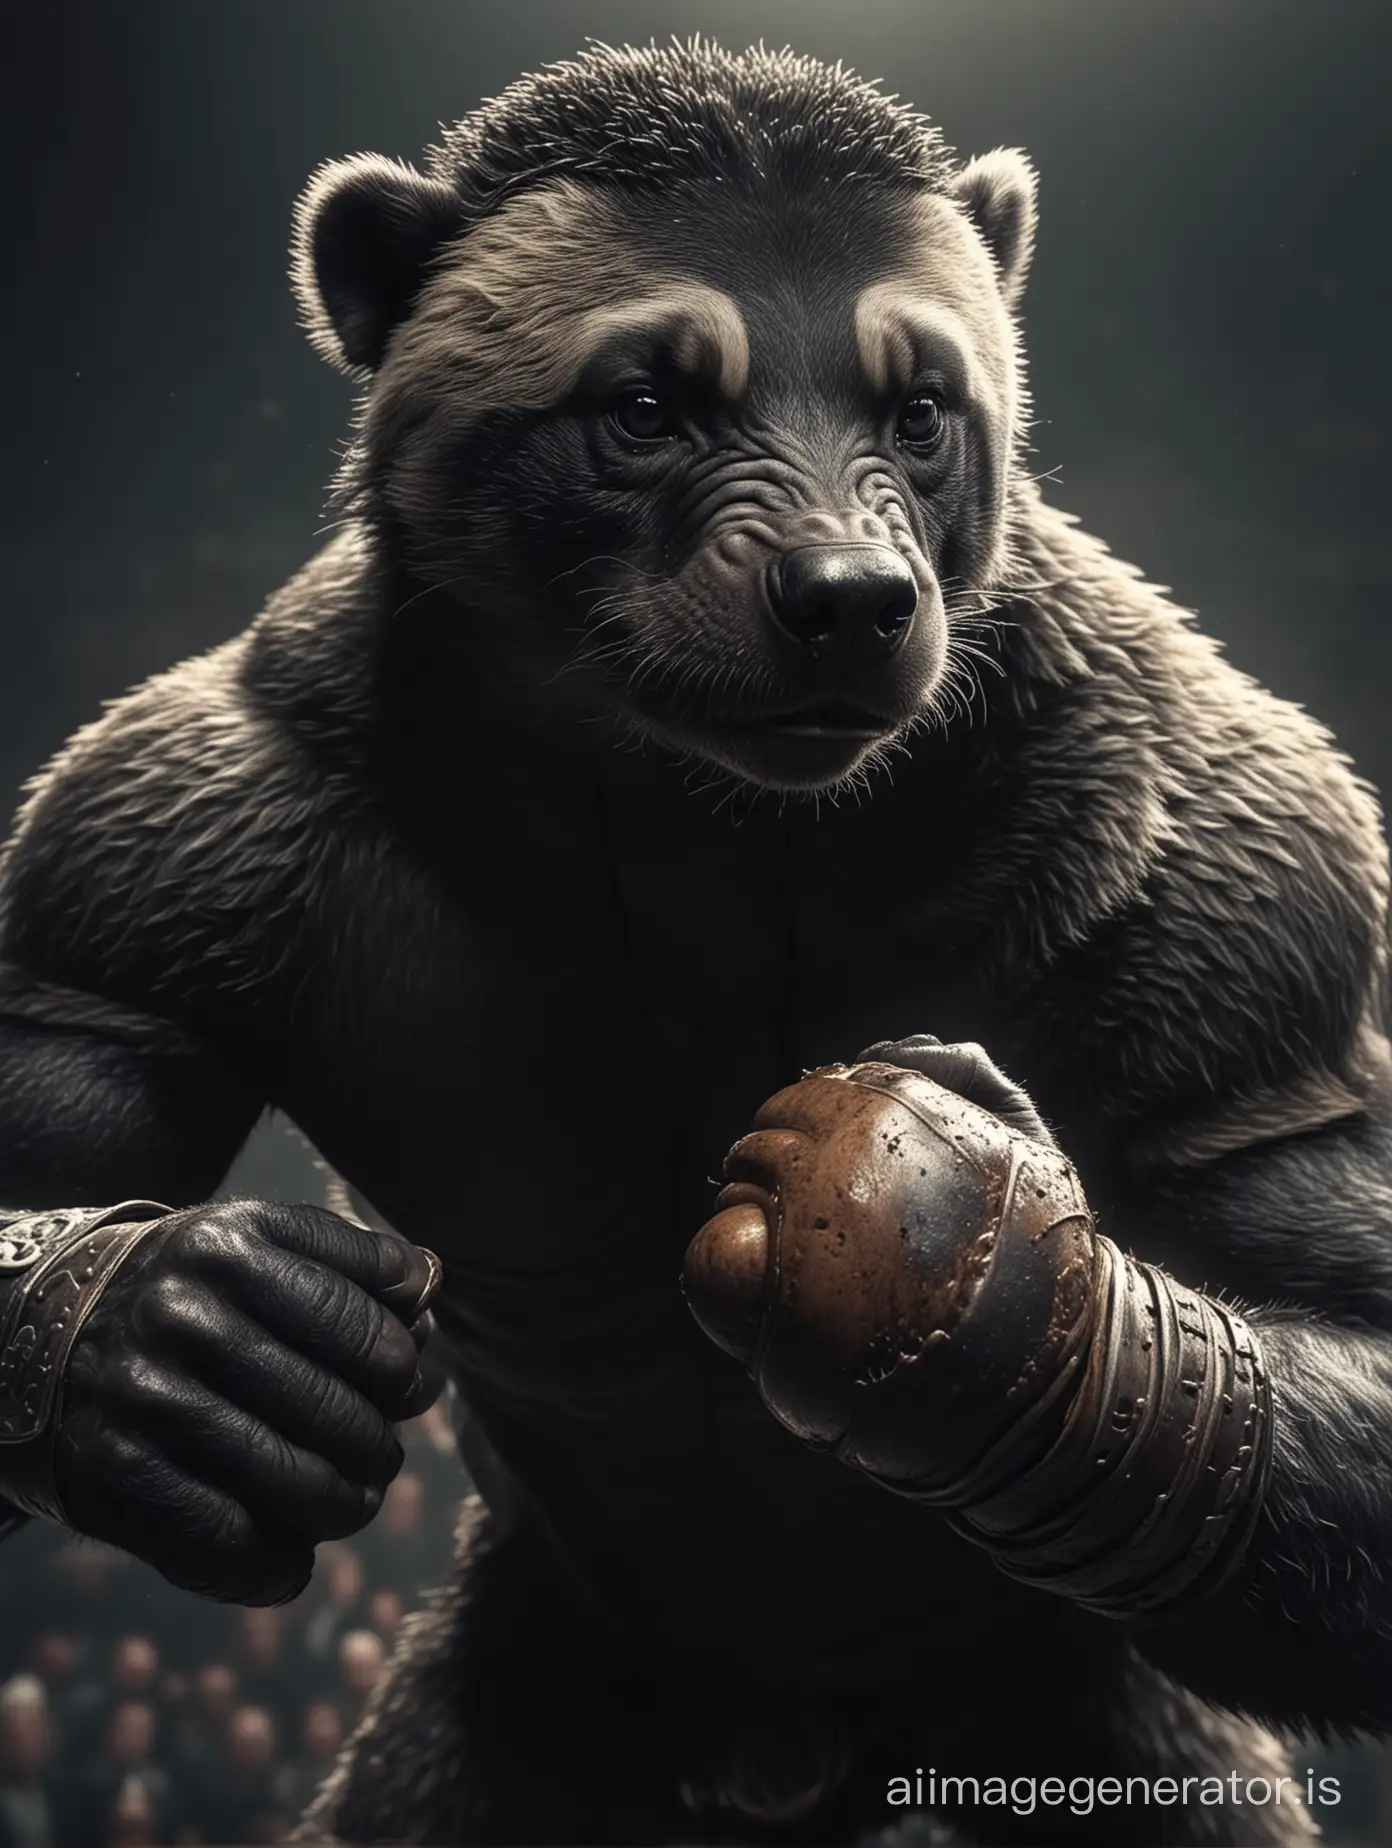 Animal (honey badger), large boxer, fight on the ring, strong punch. Anthropomorphic. Fantasy, art, brutality, strength, power, belligerence, courage. HD, 4k, detailization, proportionality, close-up. Dark tones, bright colors, contrast.